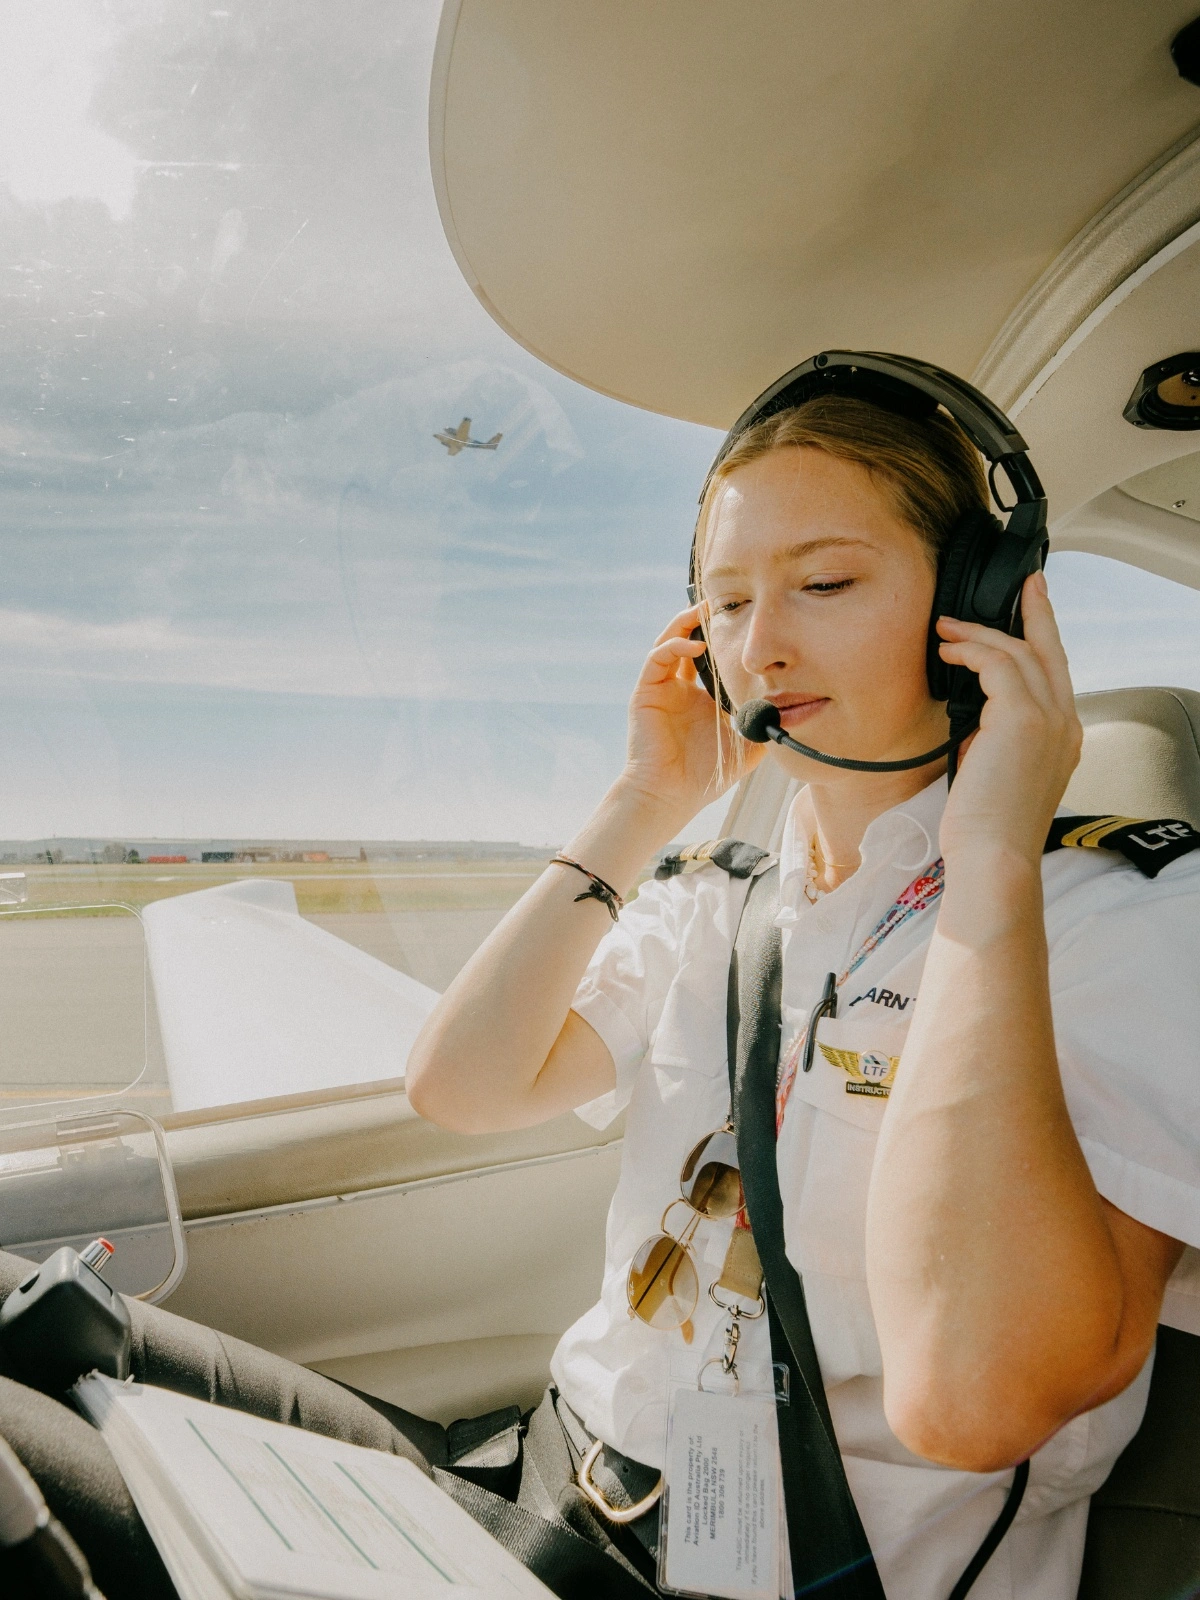 A Guide To Professional Aviation Careers